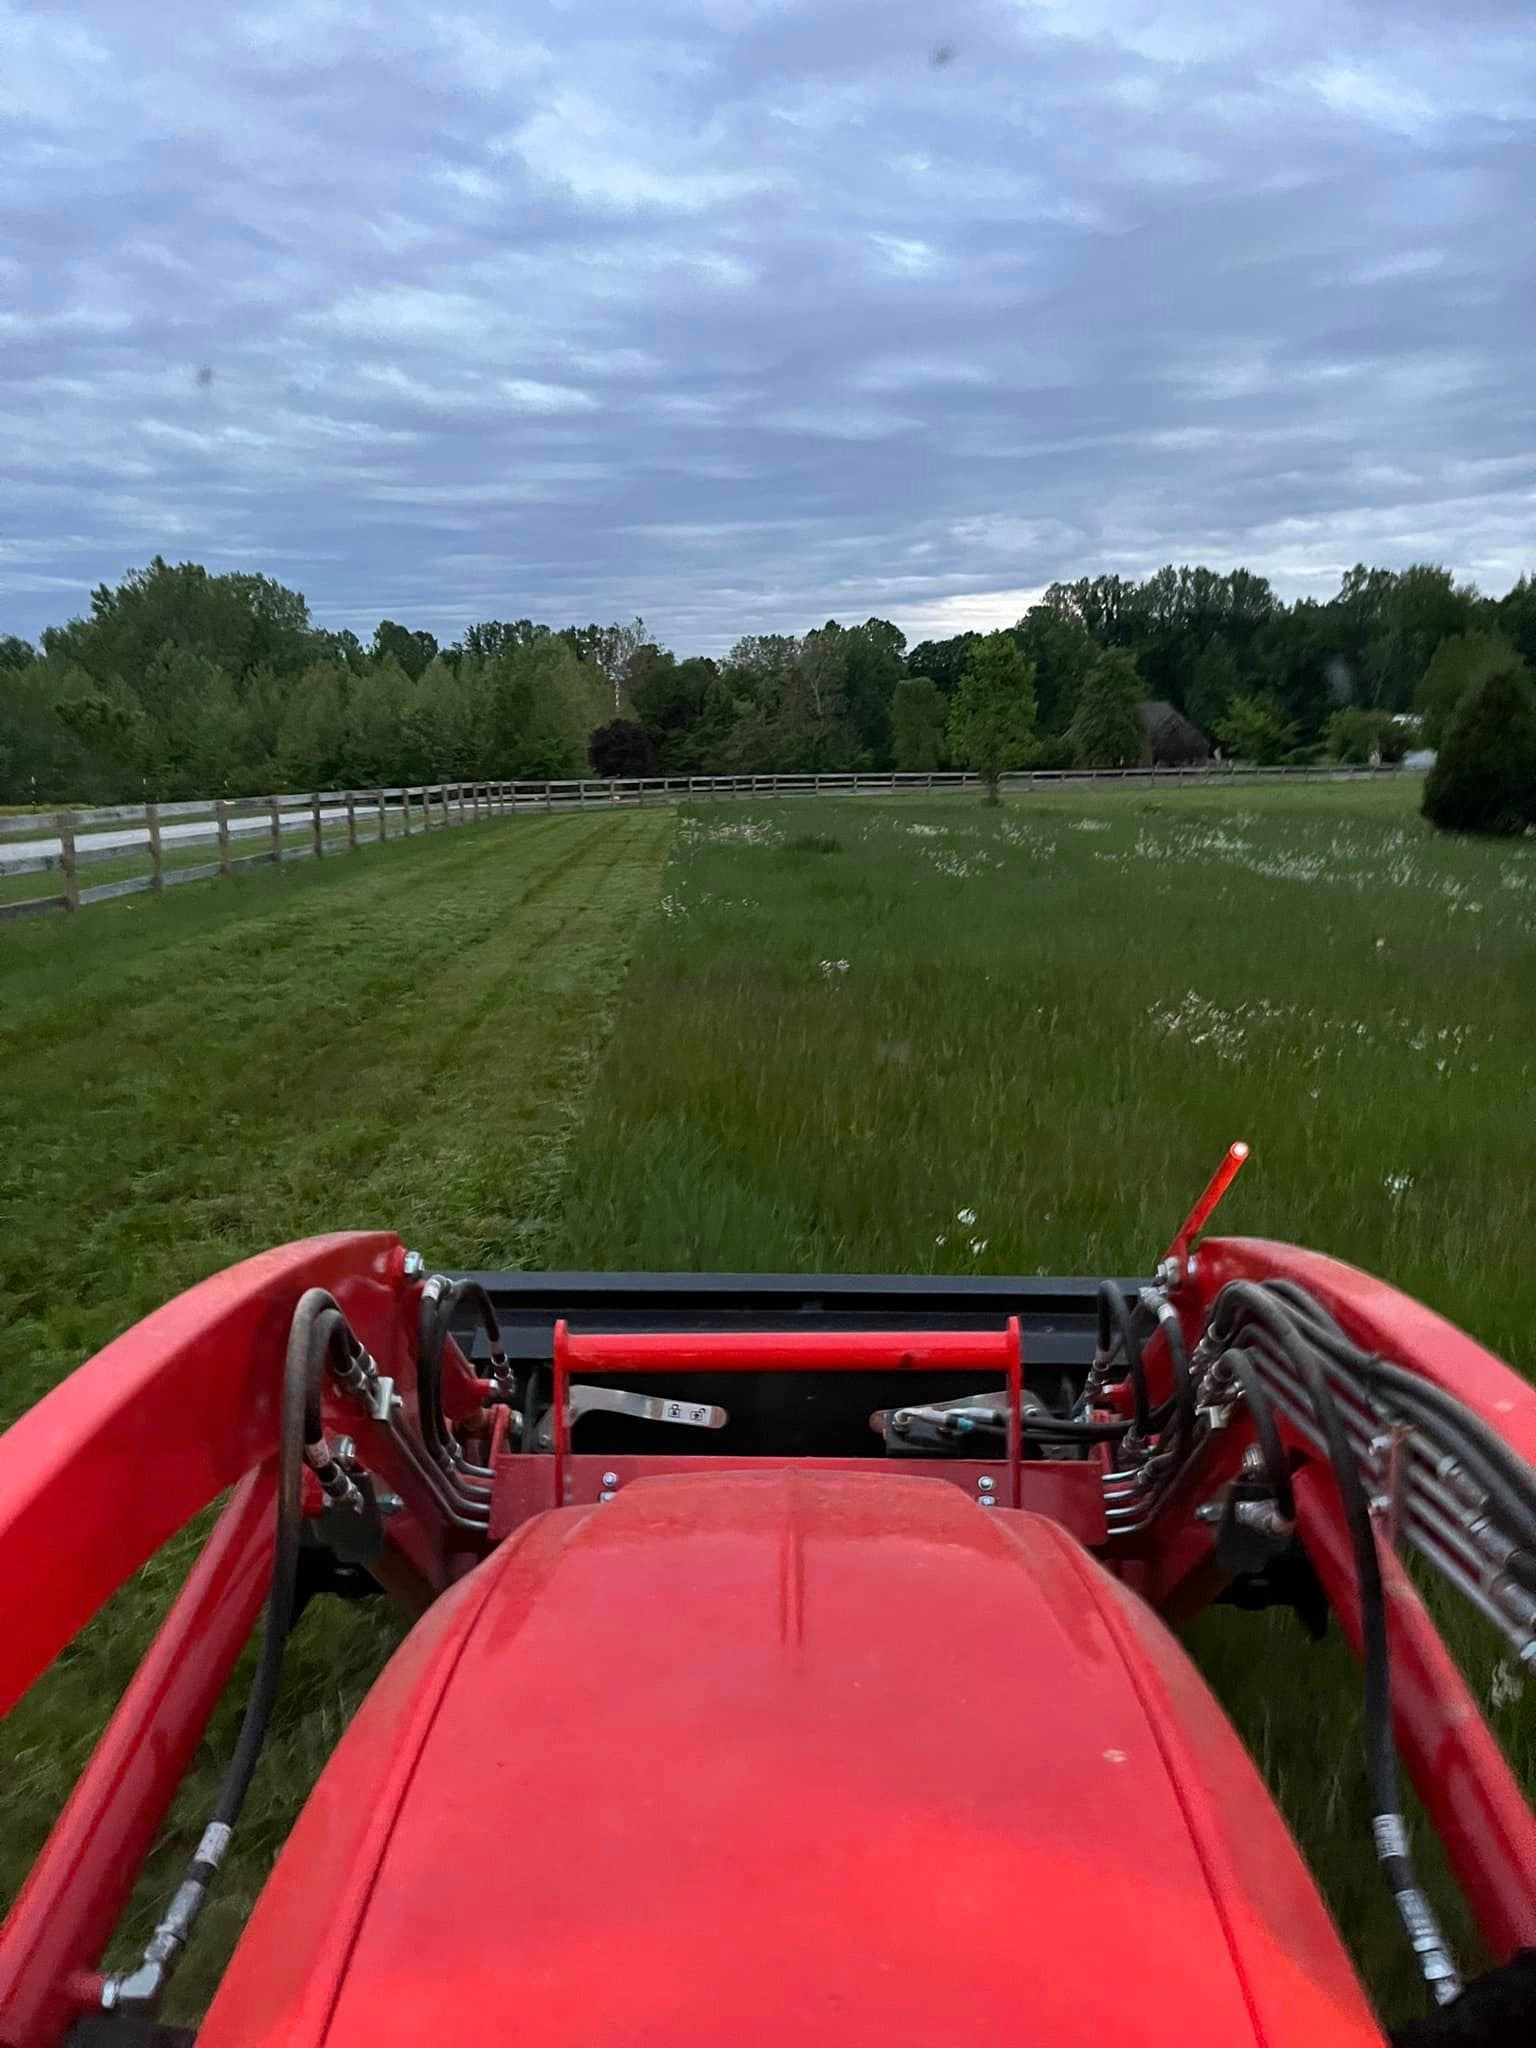 a red tractor is driving through a grassy field .